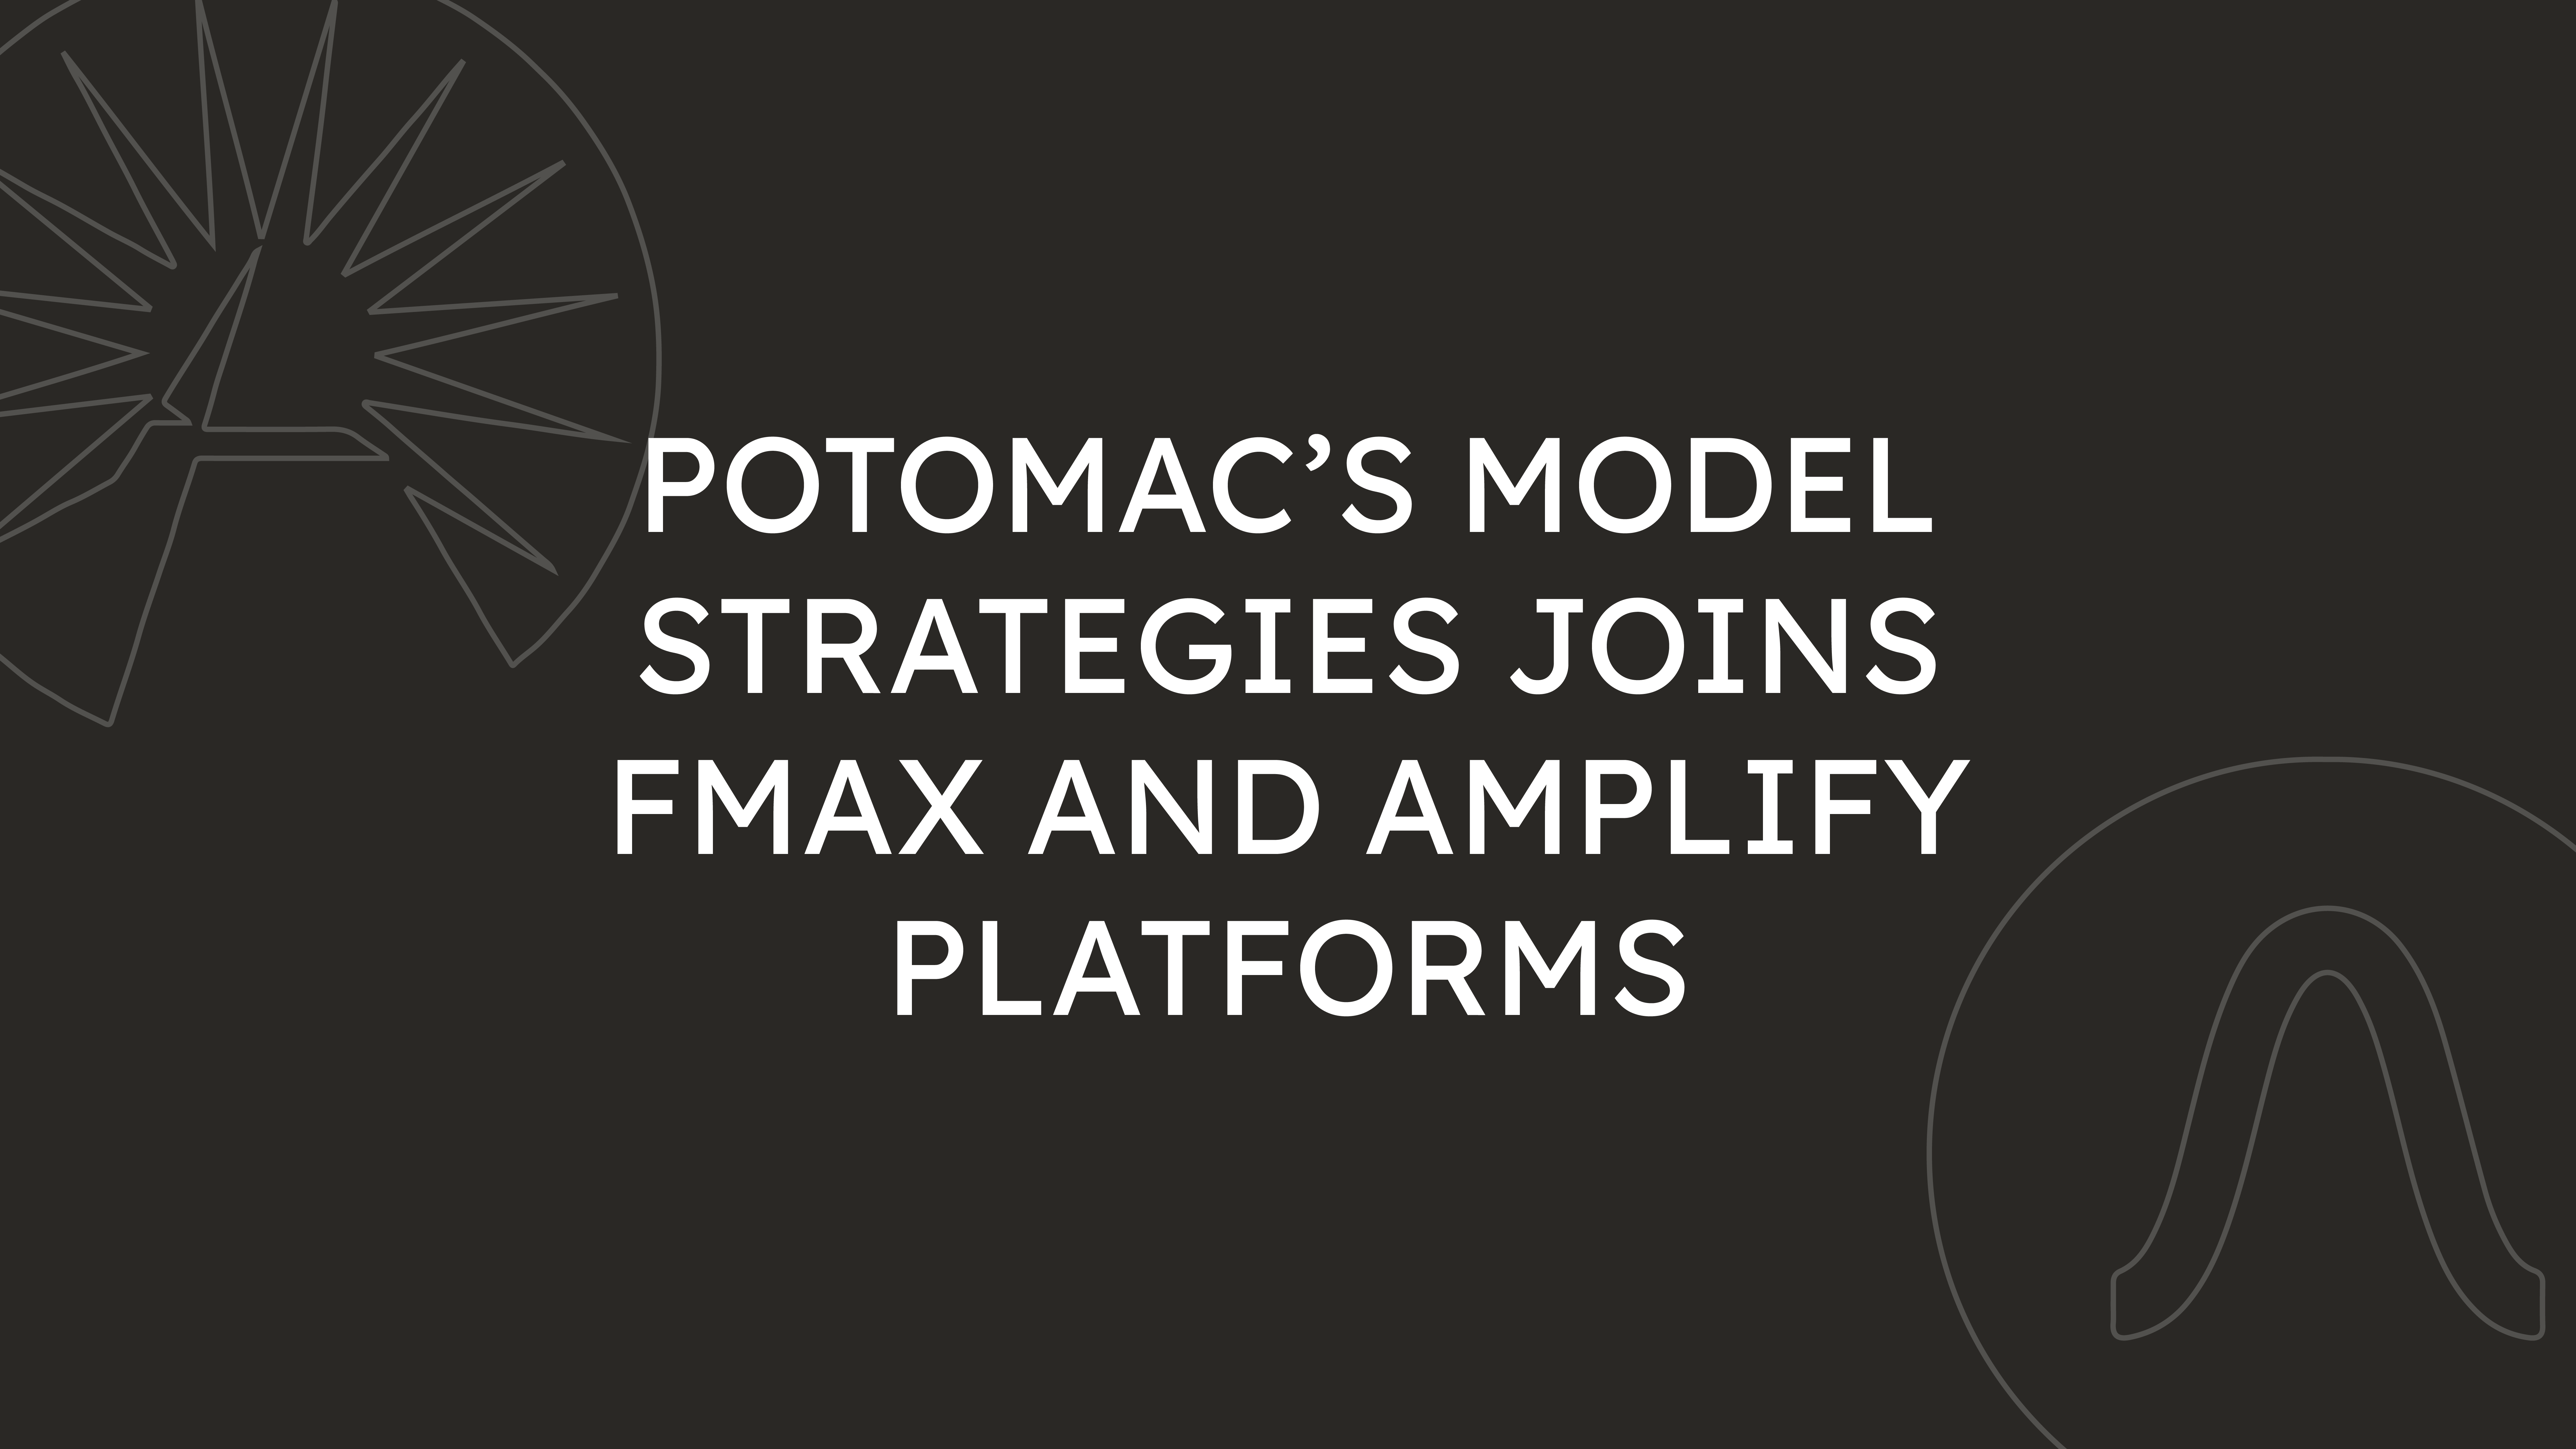 Potomac’s Model Strategies Joins FMAX and Amplify Platforms